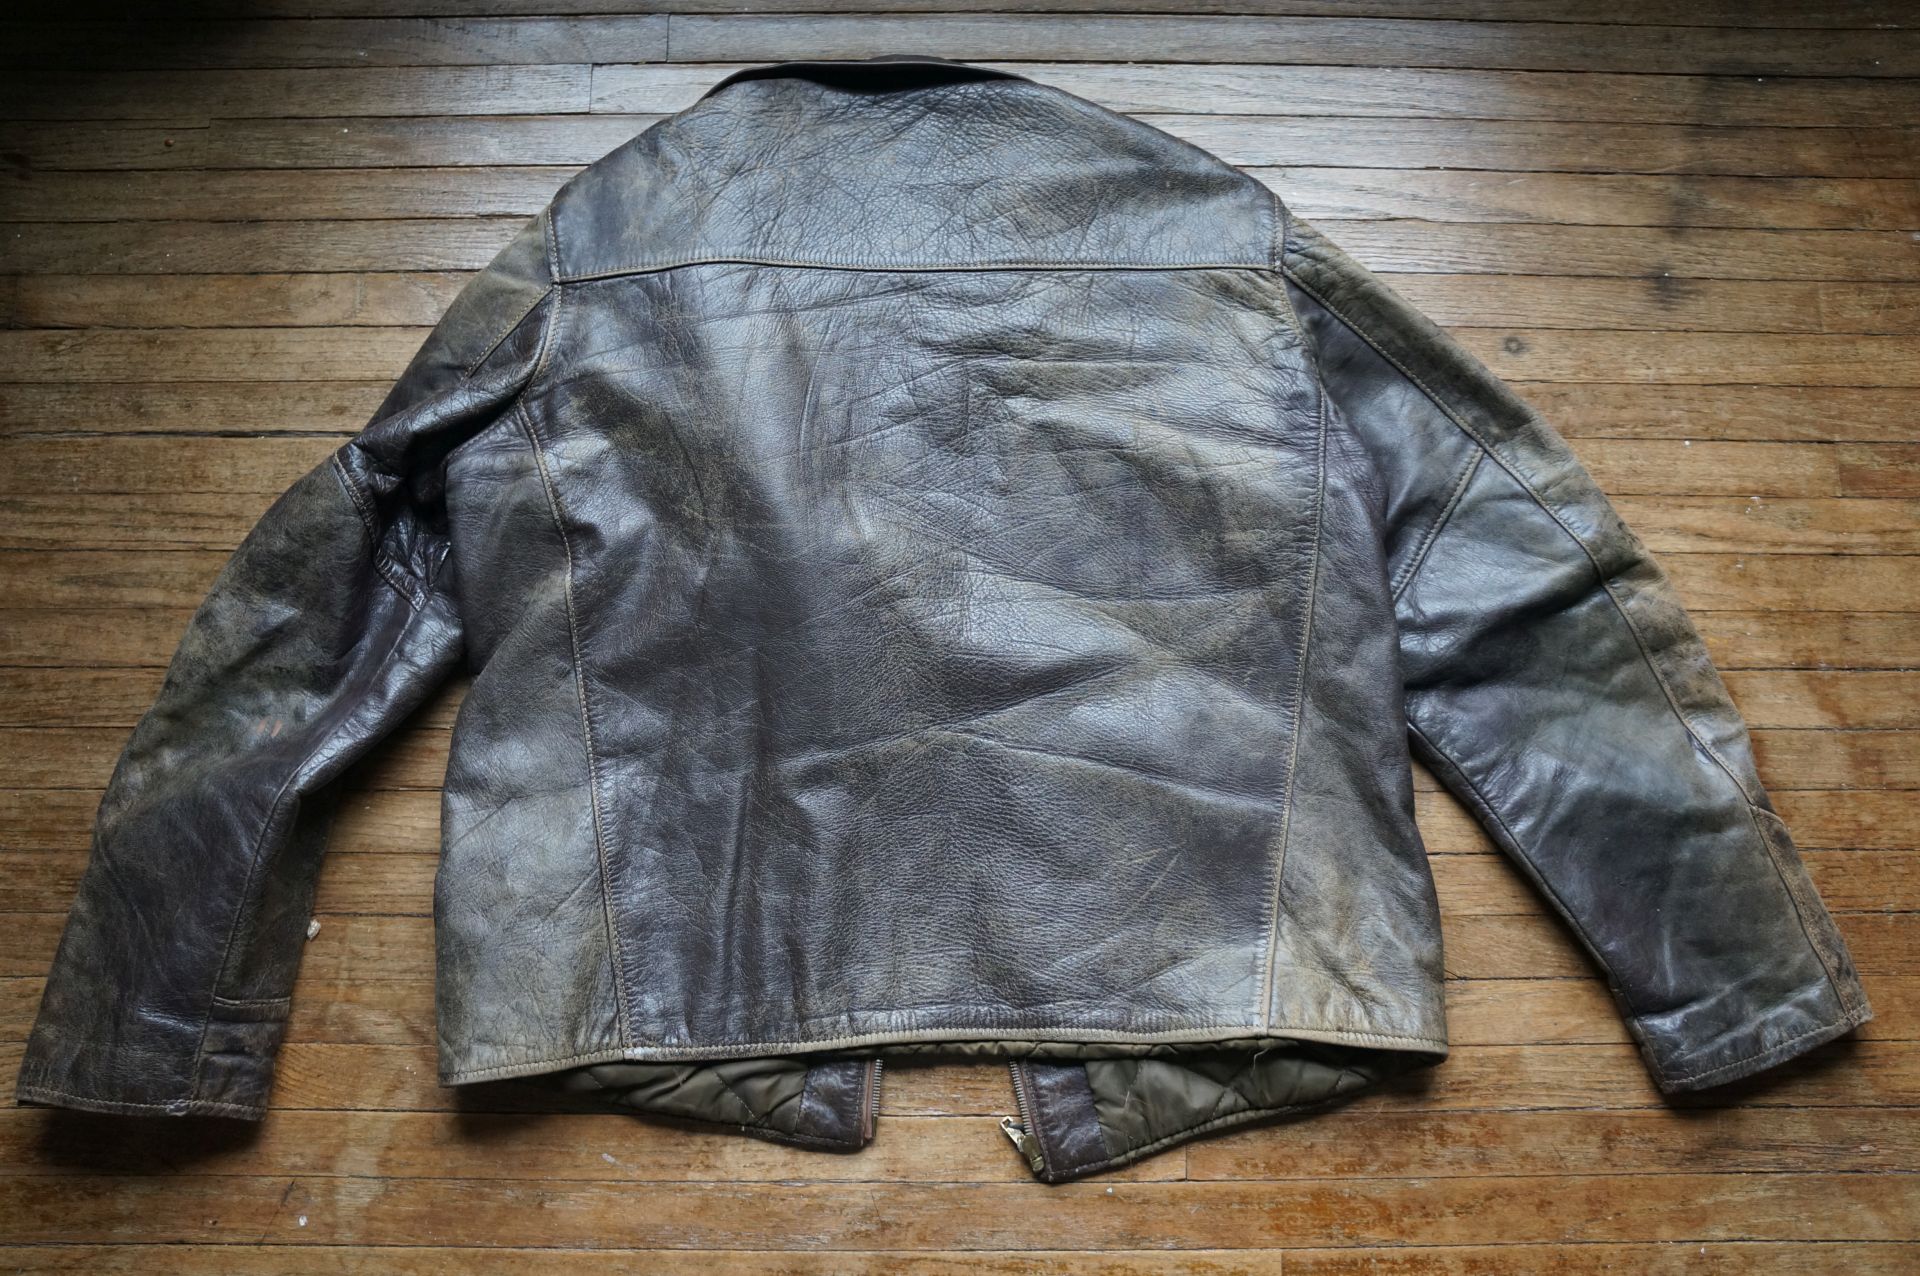 What will black leather look like when distressed and worn in? | Page 2 ...